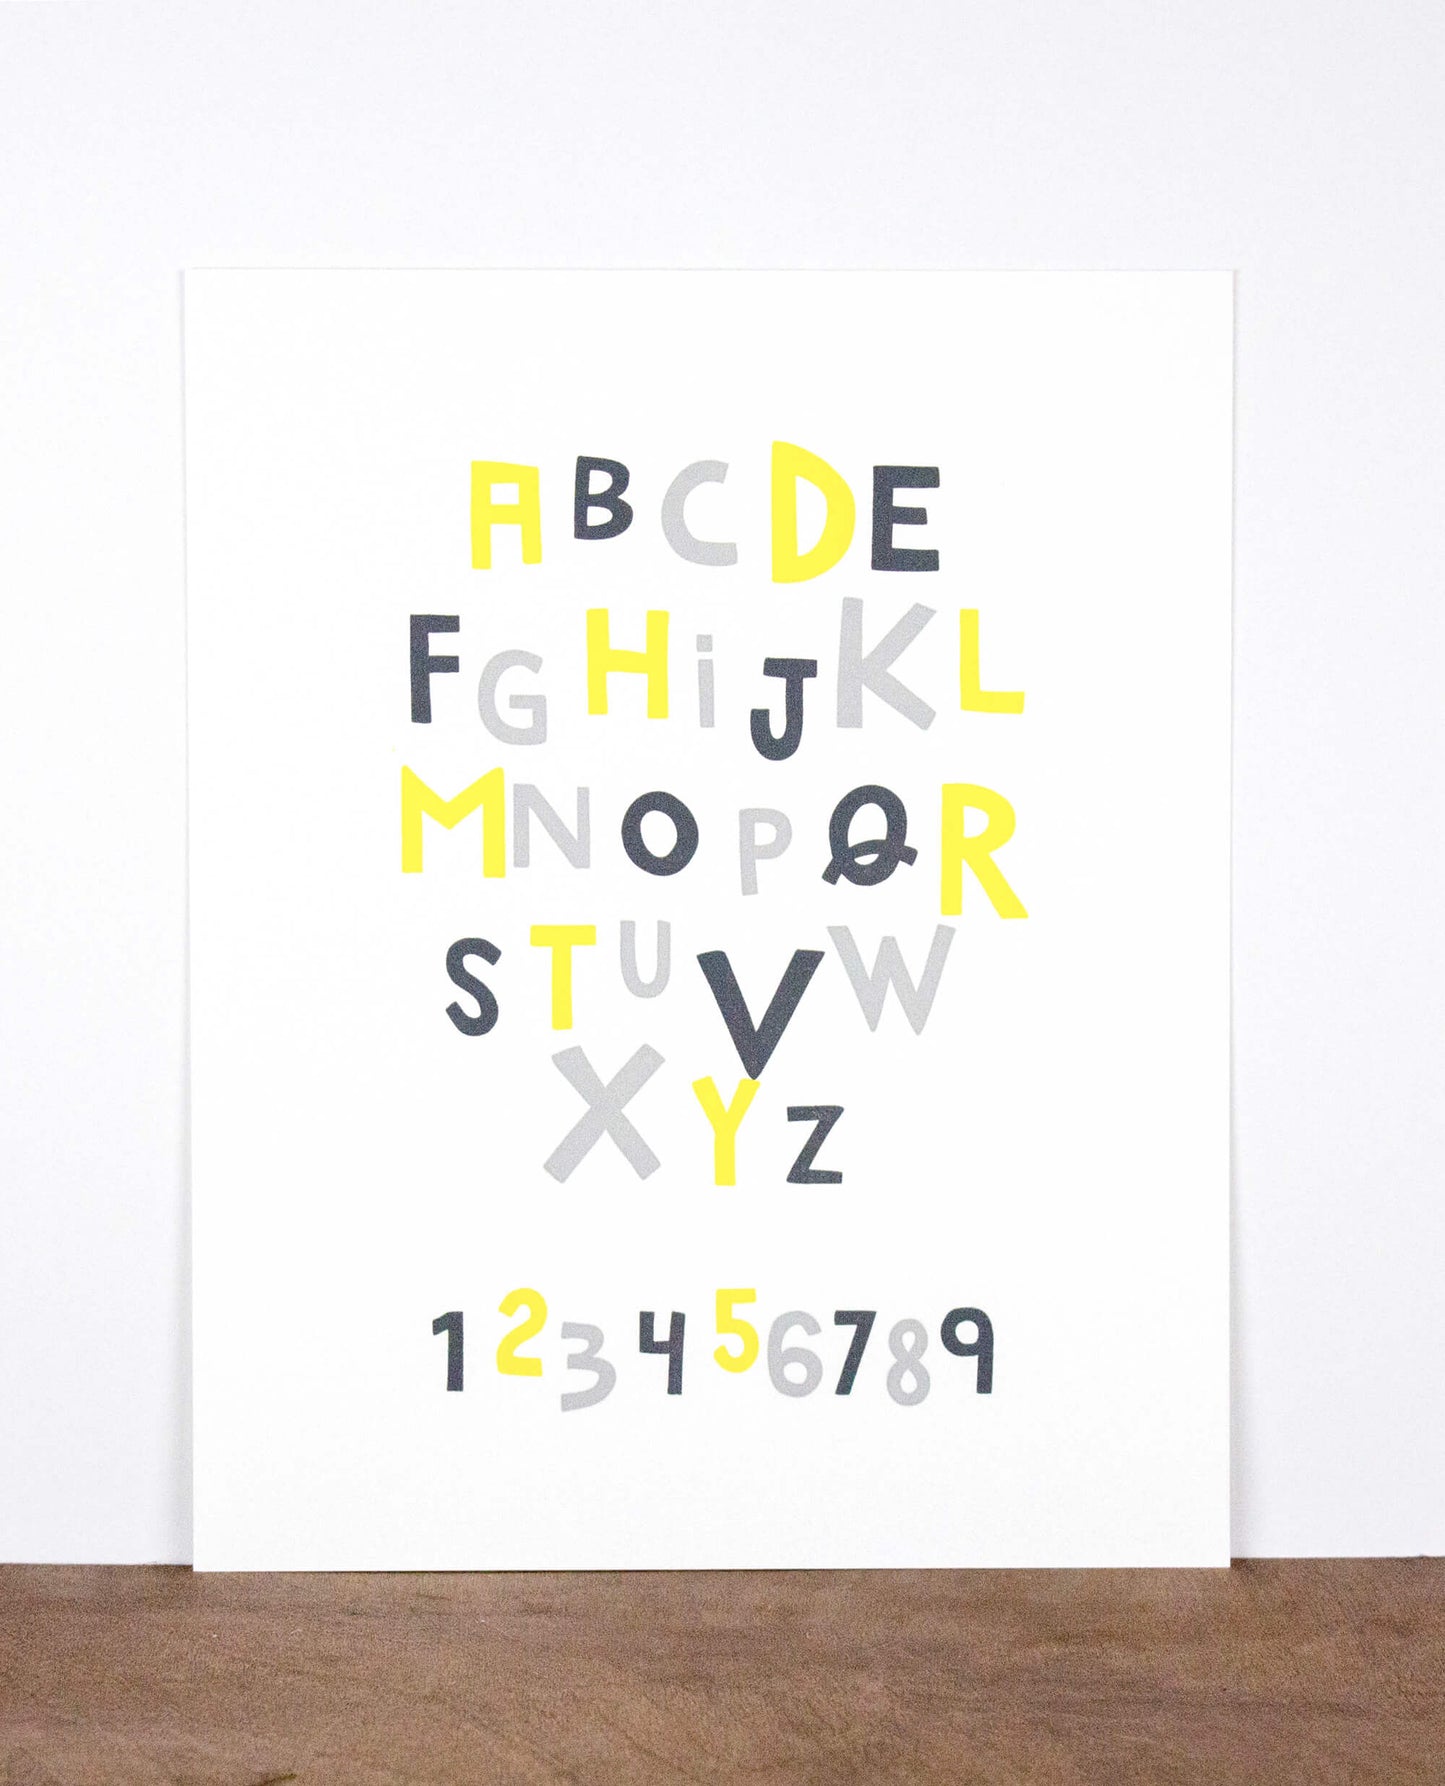 Alphabet and Numbers 8 x 10 Letterpress Print